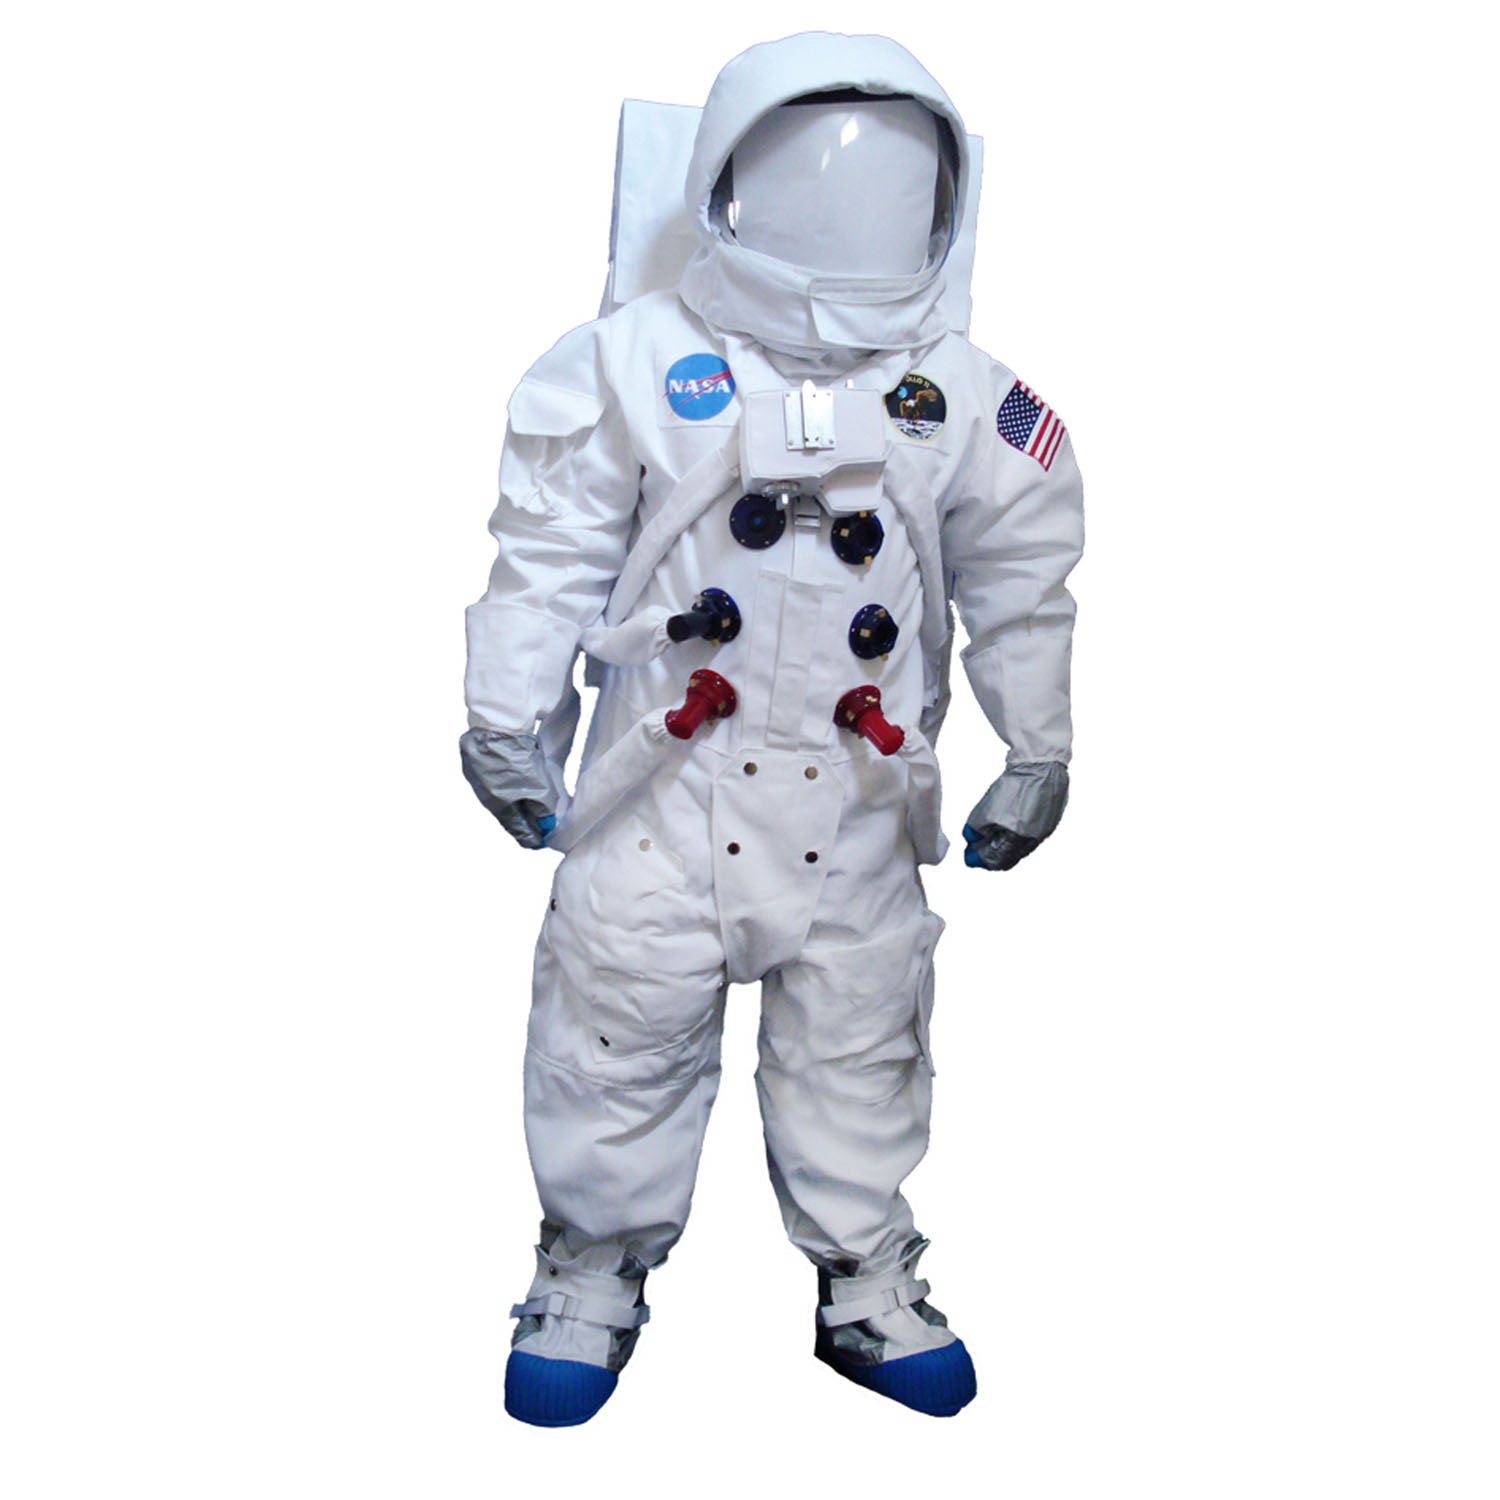 Creating sexier spacesuits for the commercial space race.